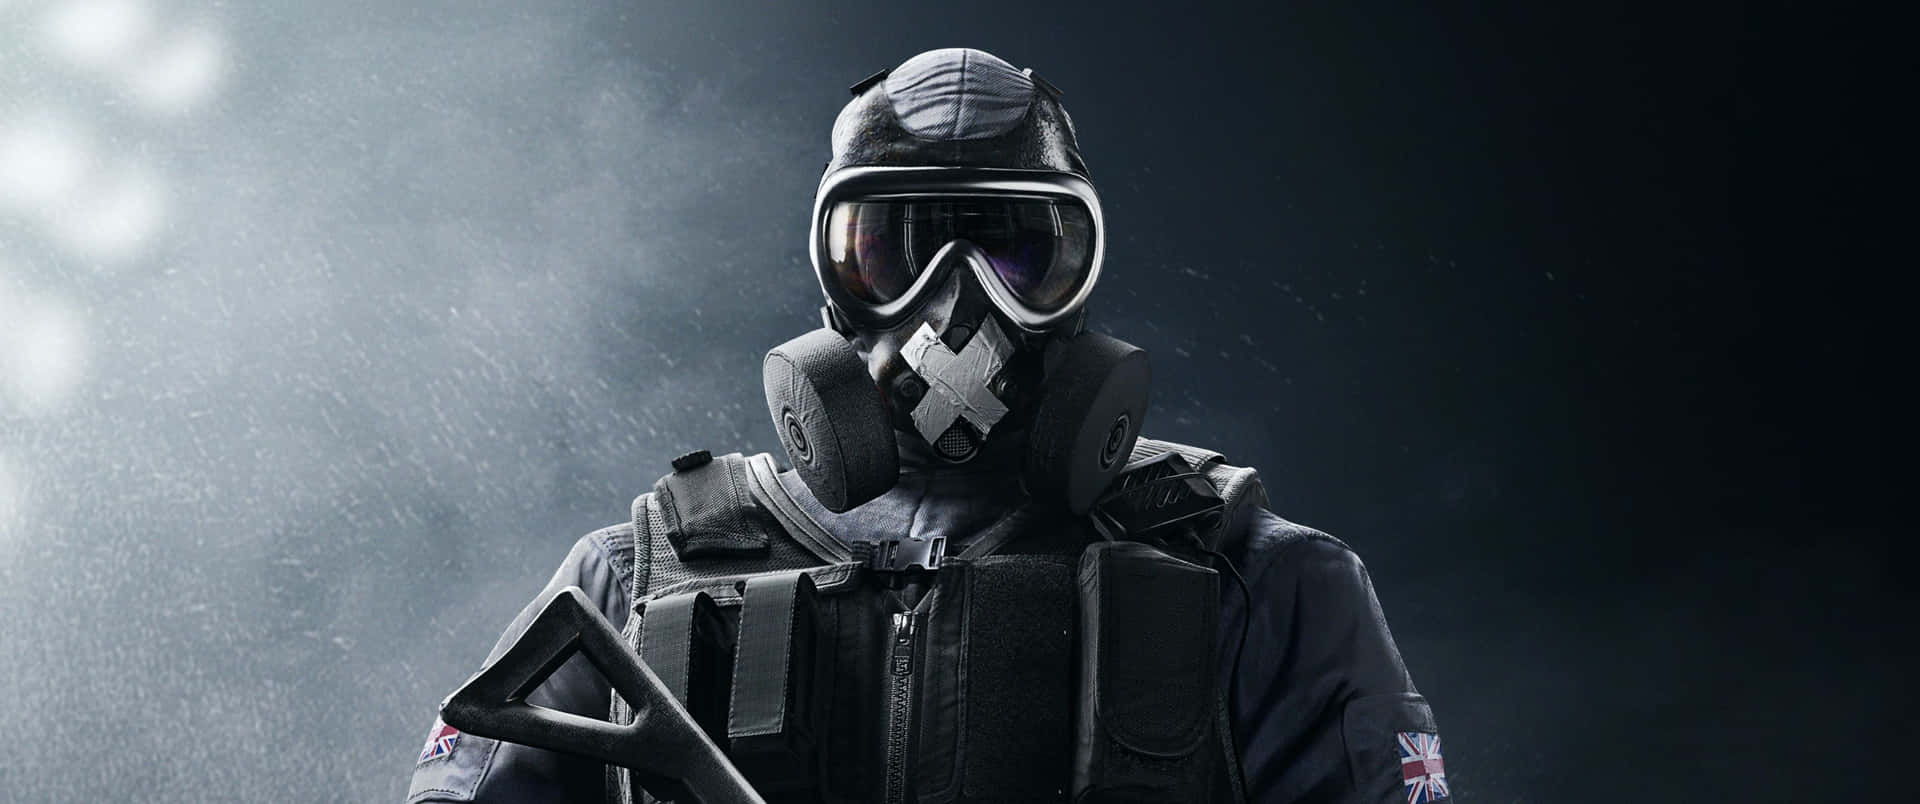 Get Ready for Intense Online Battles with Rainbow Six Siege